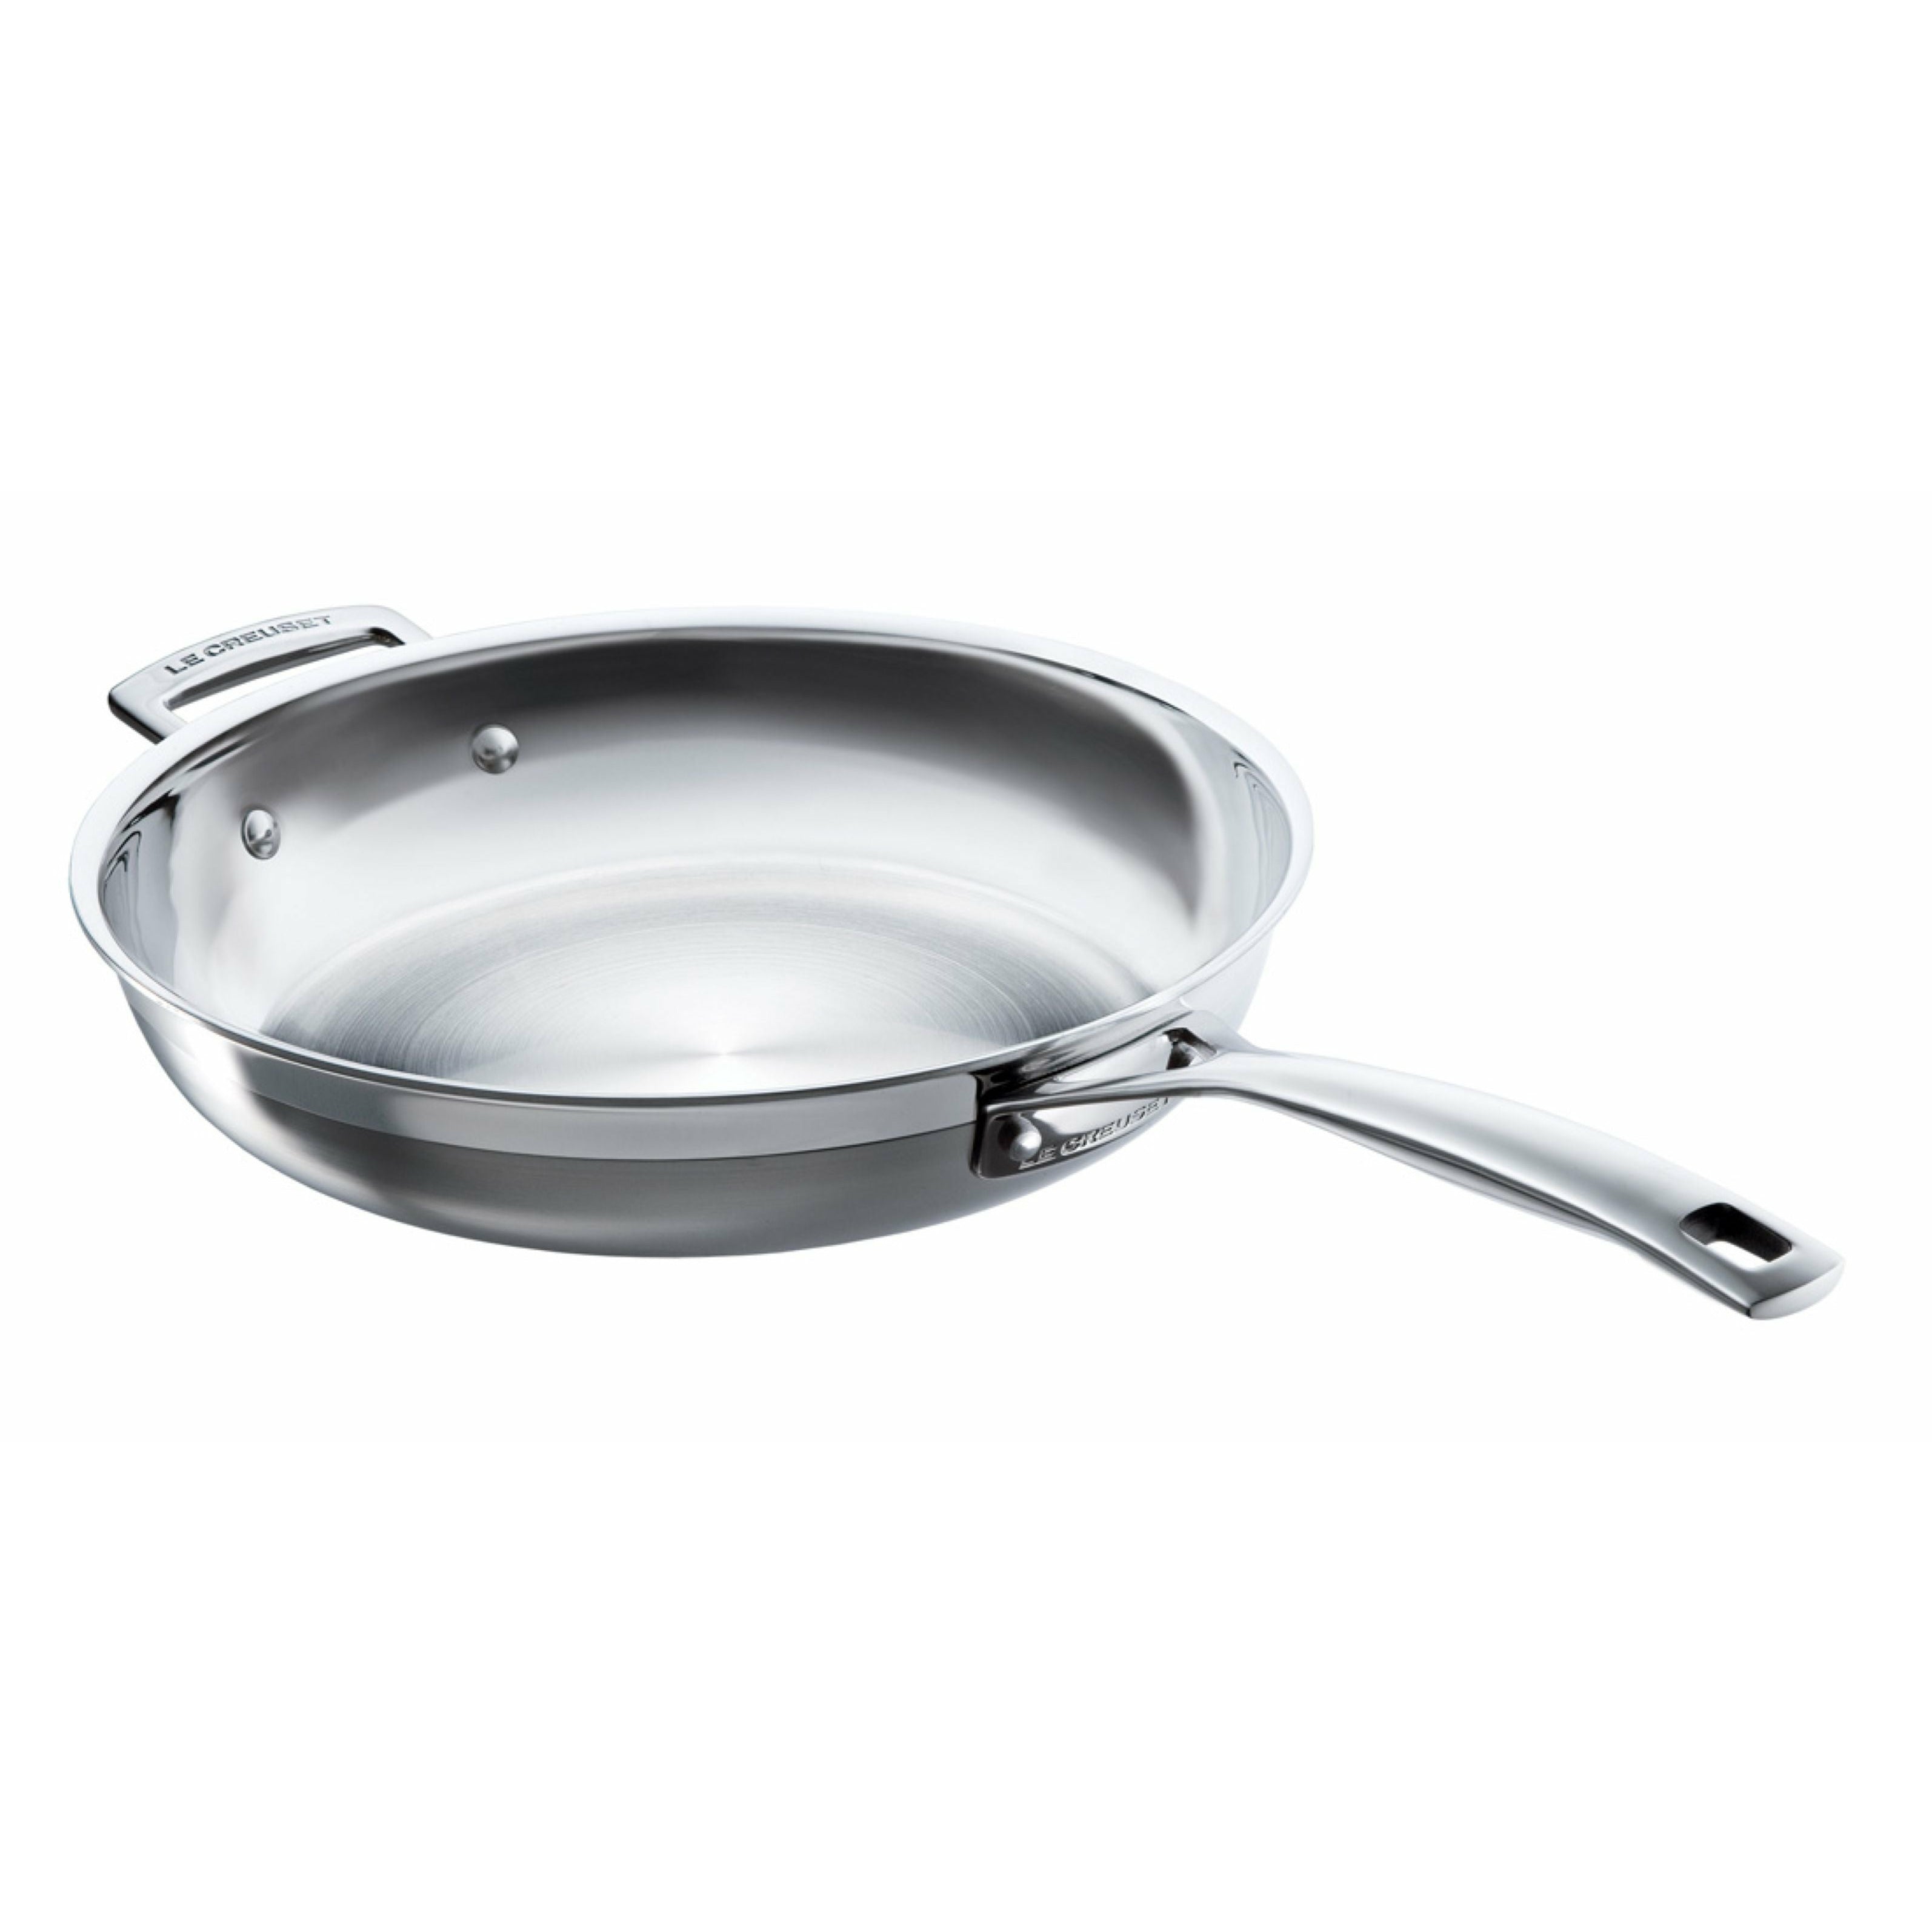 Le Creuset 3 Ply Stainless Steel Uncoated Frying Pan With Helper Handle, 28 Cm